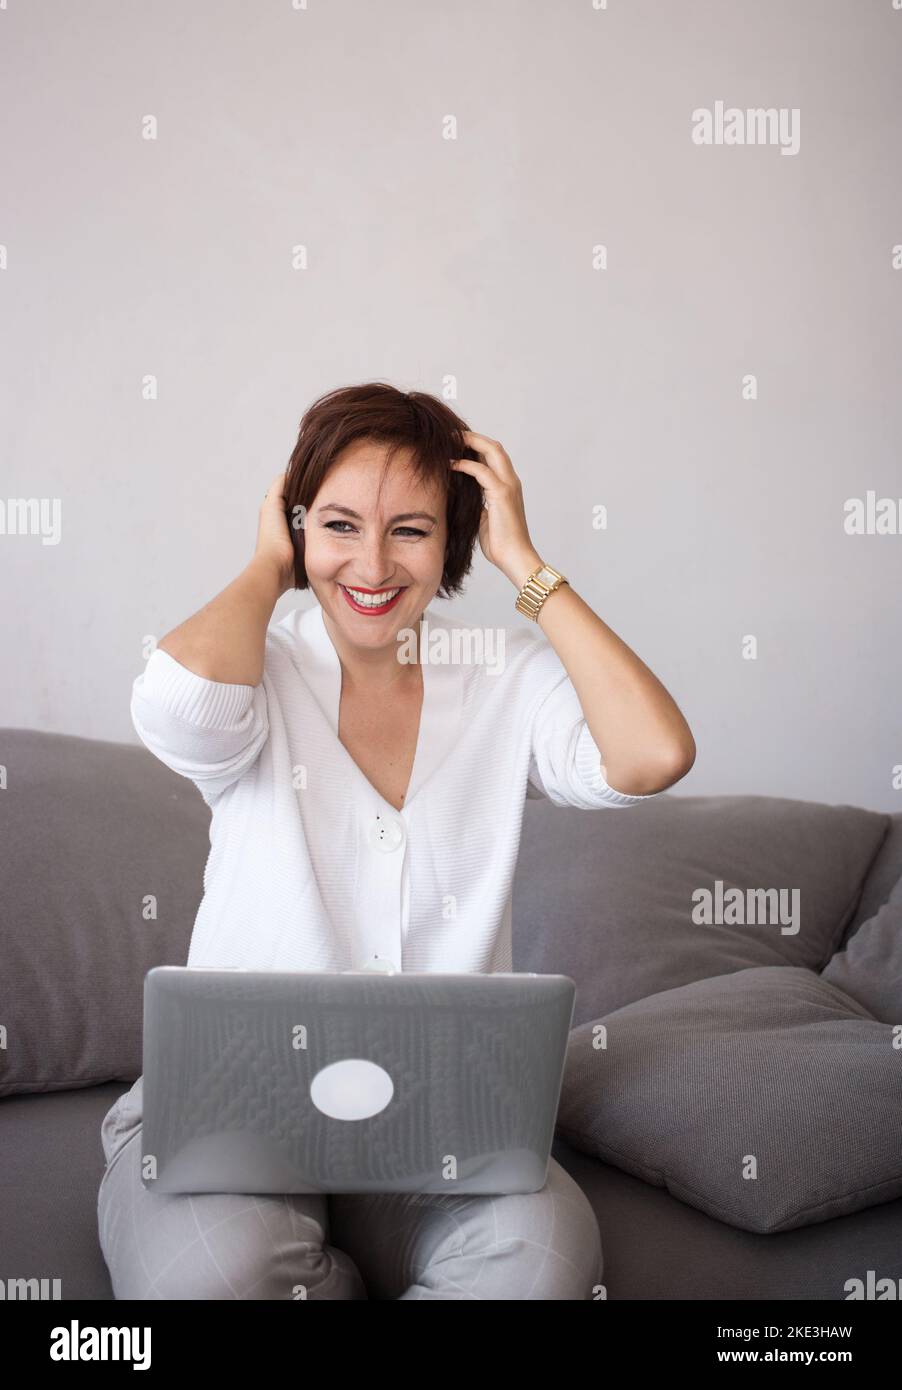 Adorable successful happy confident brunette woman 35-40 years old sits on the couch and works using a laptop. Modern technologies of communication, l Stock Photo